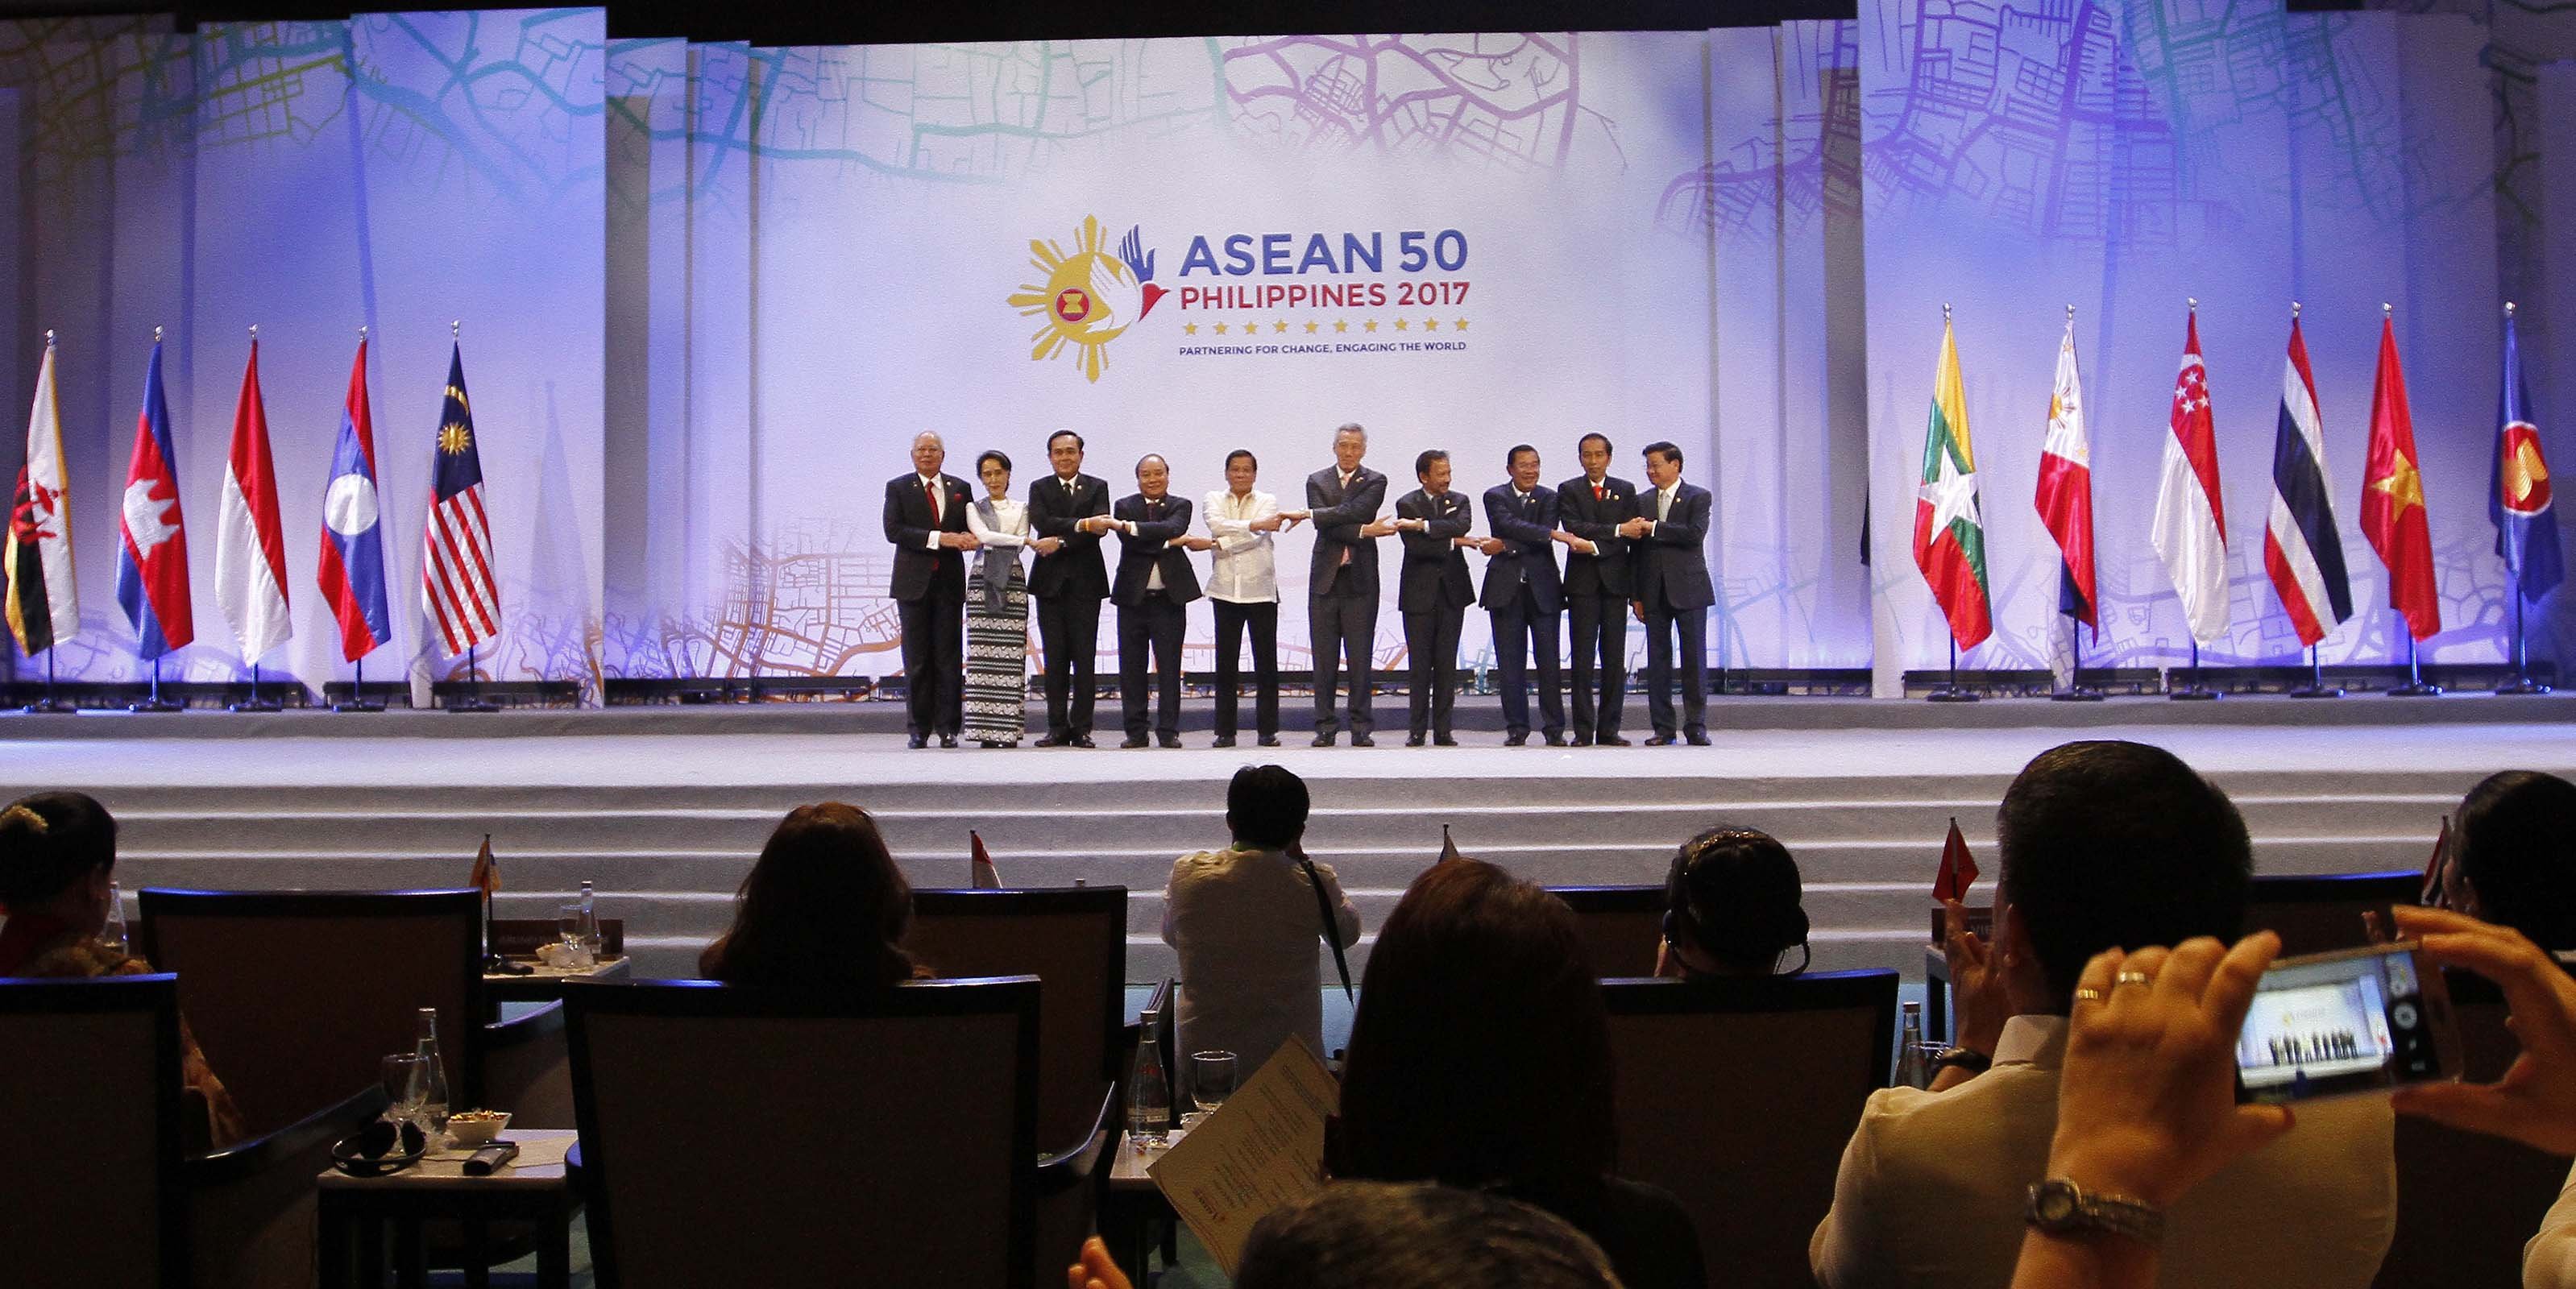 Leaders of the Association of Southeast Asian Nations